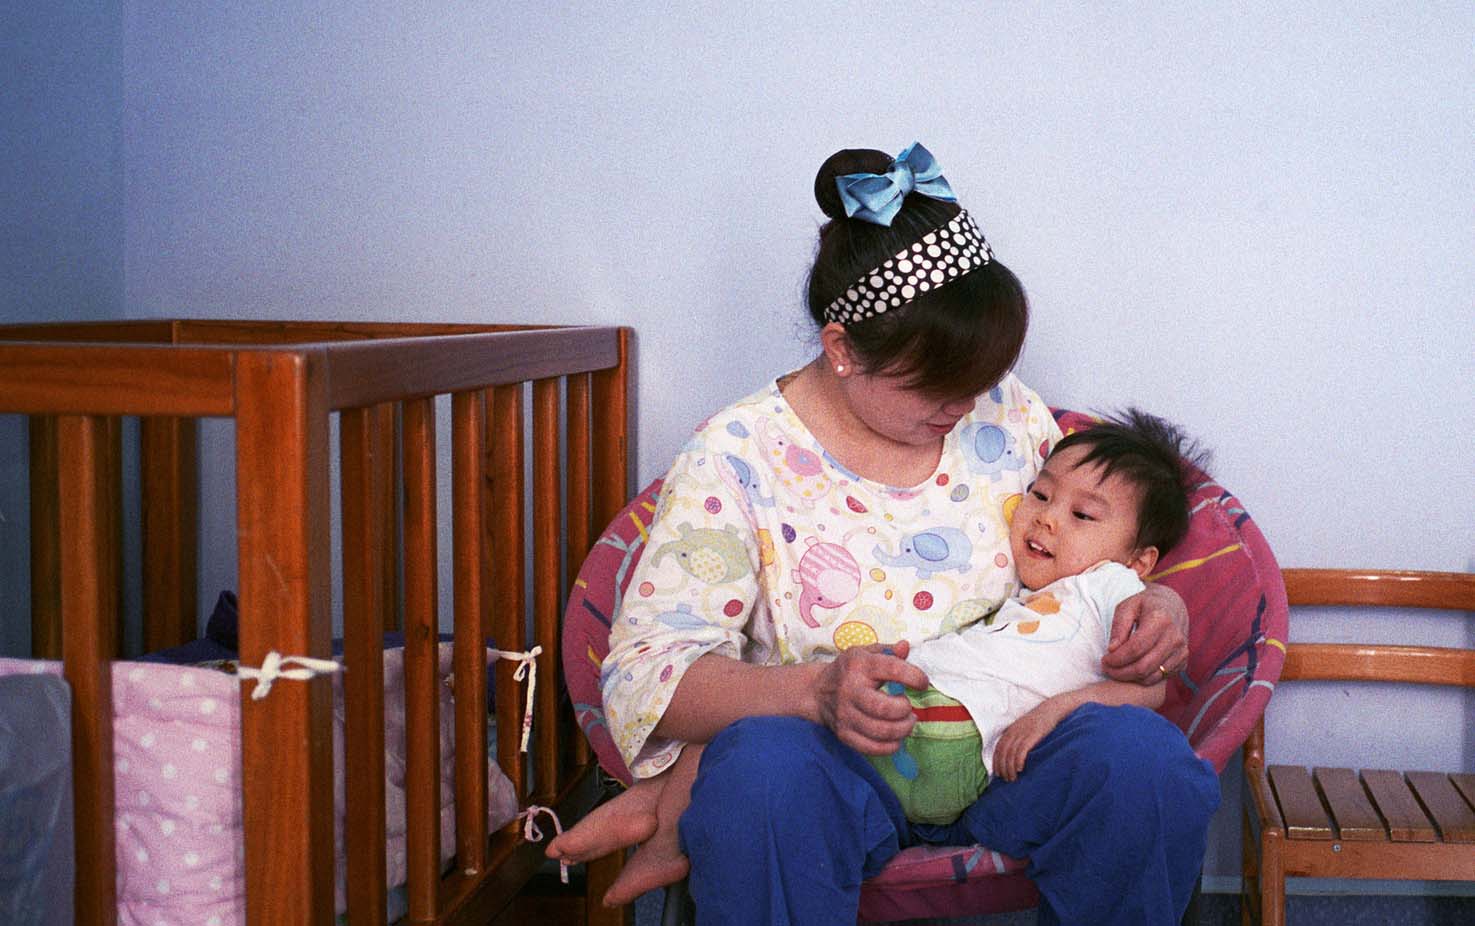 A professional caretaker holds a young patient at Butterfly Children’s Hospices in Changsha, Hunan province, May 30, 2013. Zhong Ruijun/Southern Metropolis Daily/IC